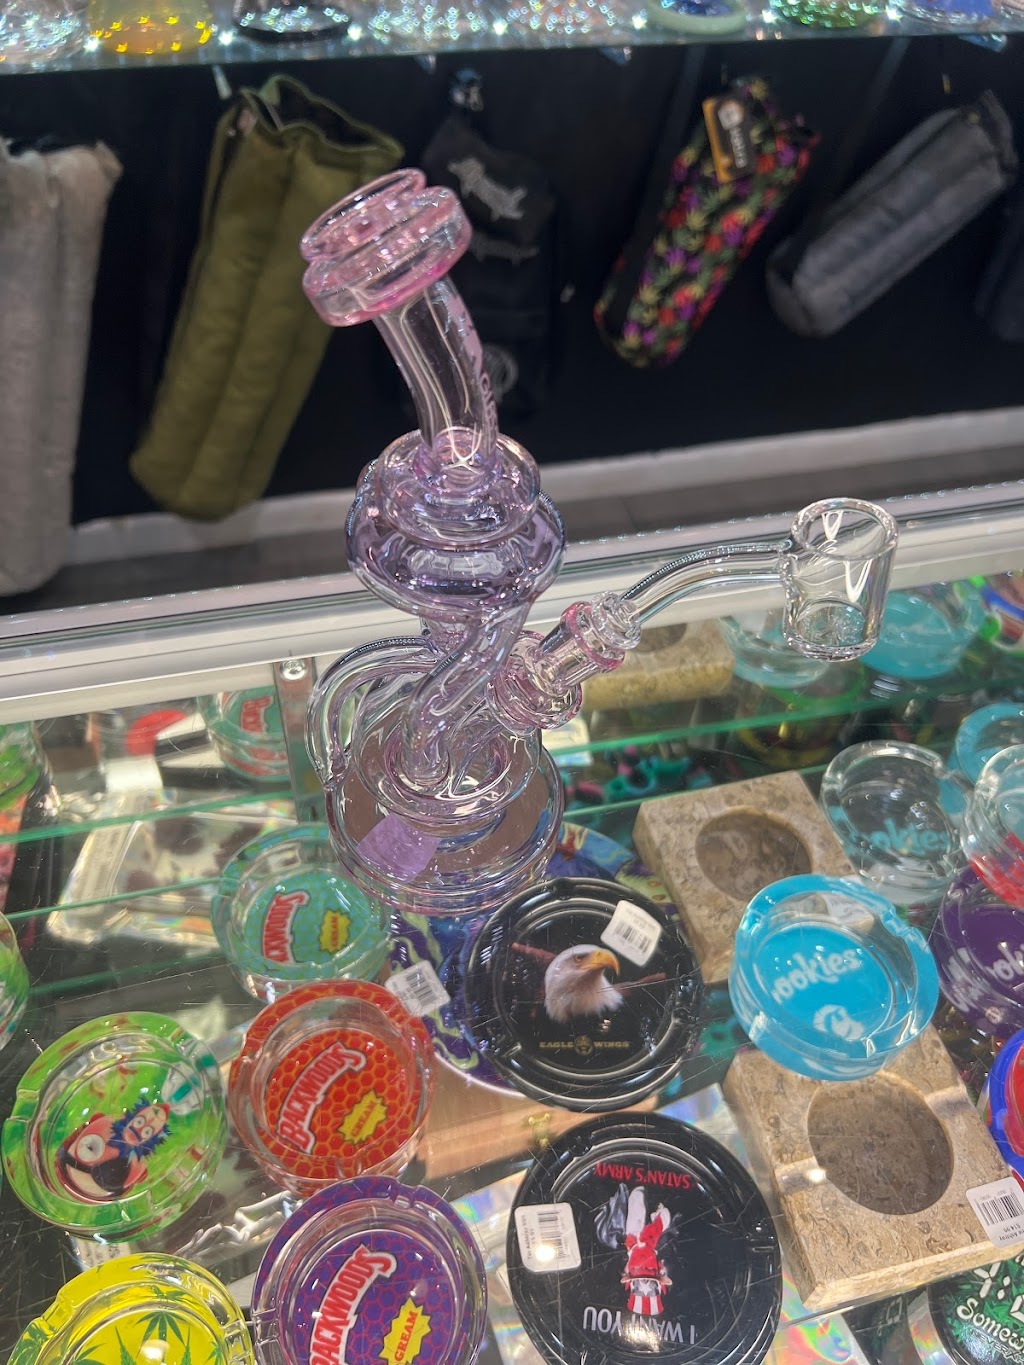 The Pipe King Chino(Water Pipe Gallery, Vape, Kratom, CBD, Dab) | 12200 Central Ave Ste A, Chino, CA 91710 | Phone: (909) 548-0148